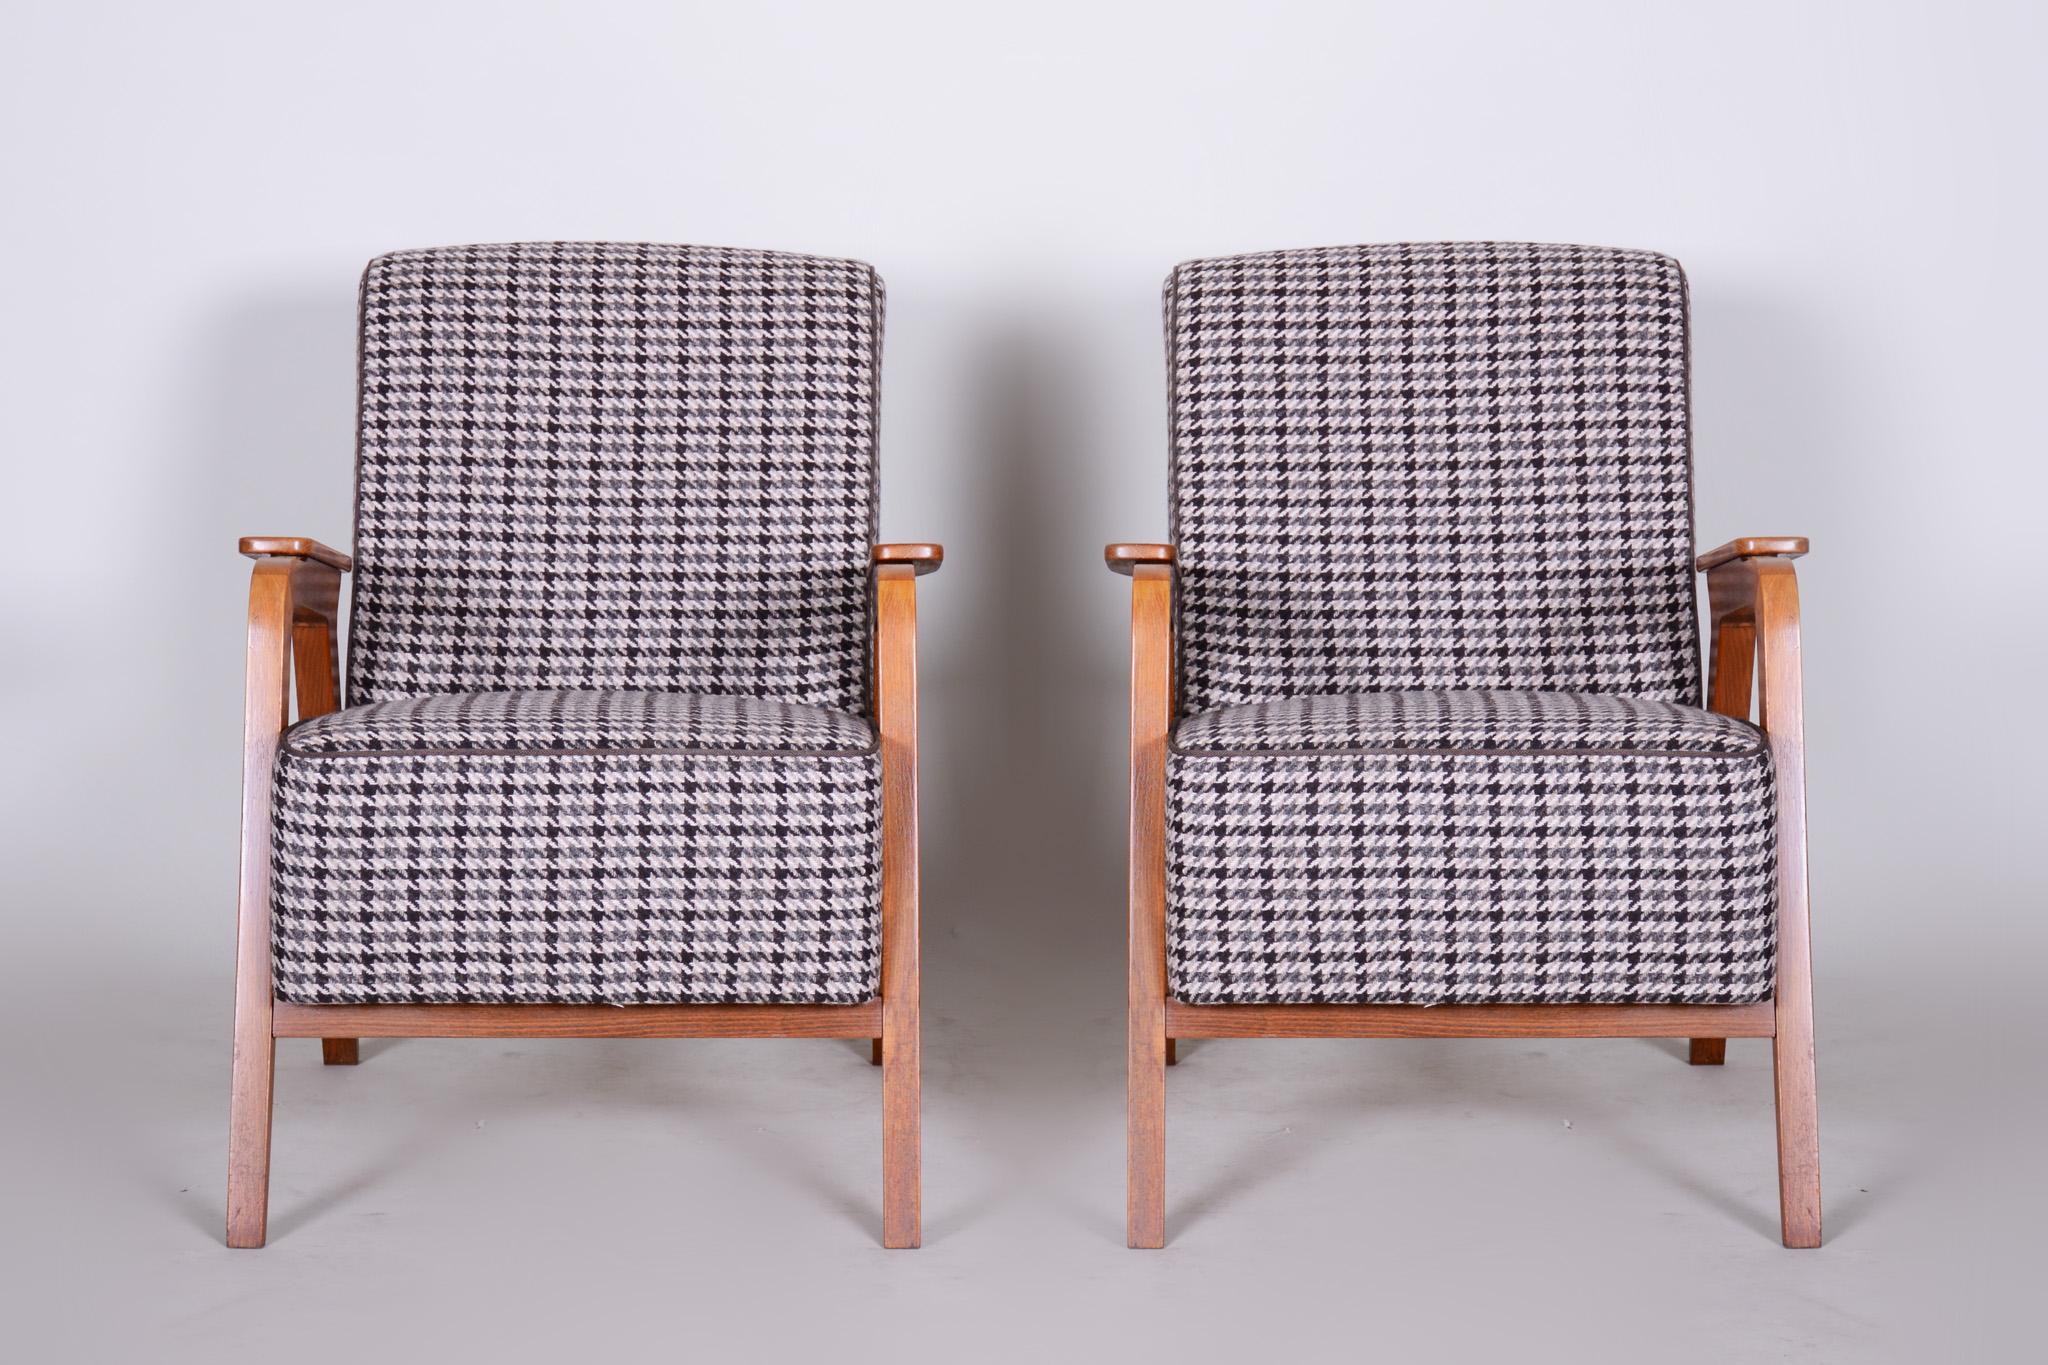 Pair of midcentury armchairs
Period: 1940-1949.
Material: Beech
Source: Czechia (Czechoslovakia)

New upholstery in original fabric.